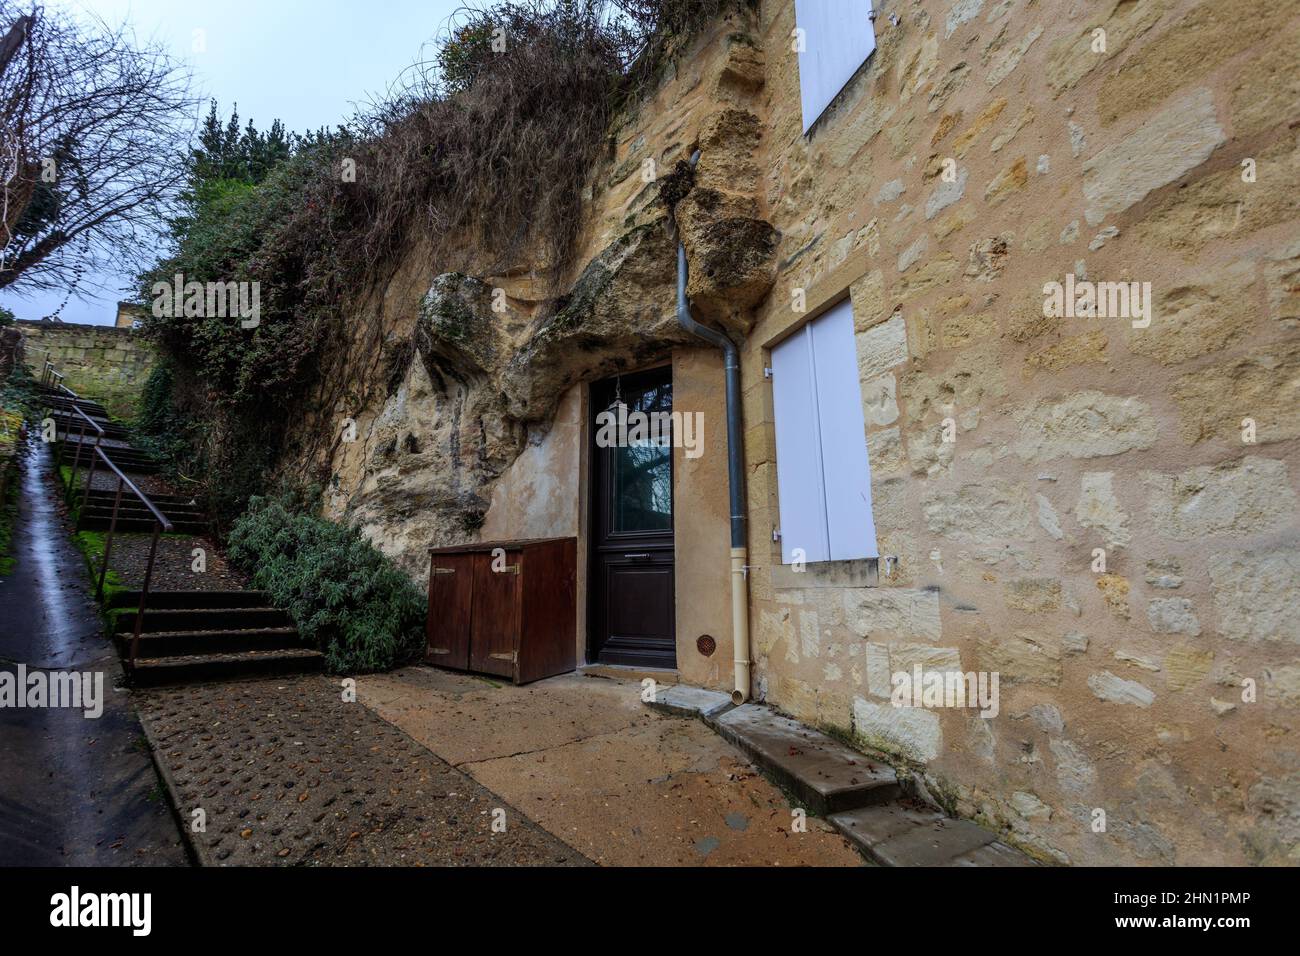 A house built inside a cave in the medieval village of Saint Emilion, a UNESCO World Heritage Site. France. Stock Photo